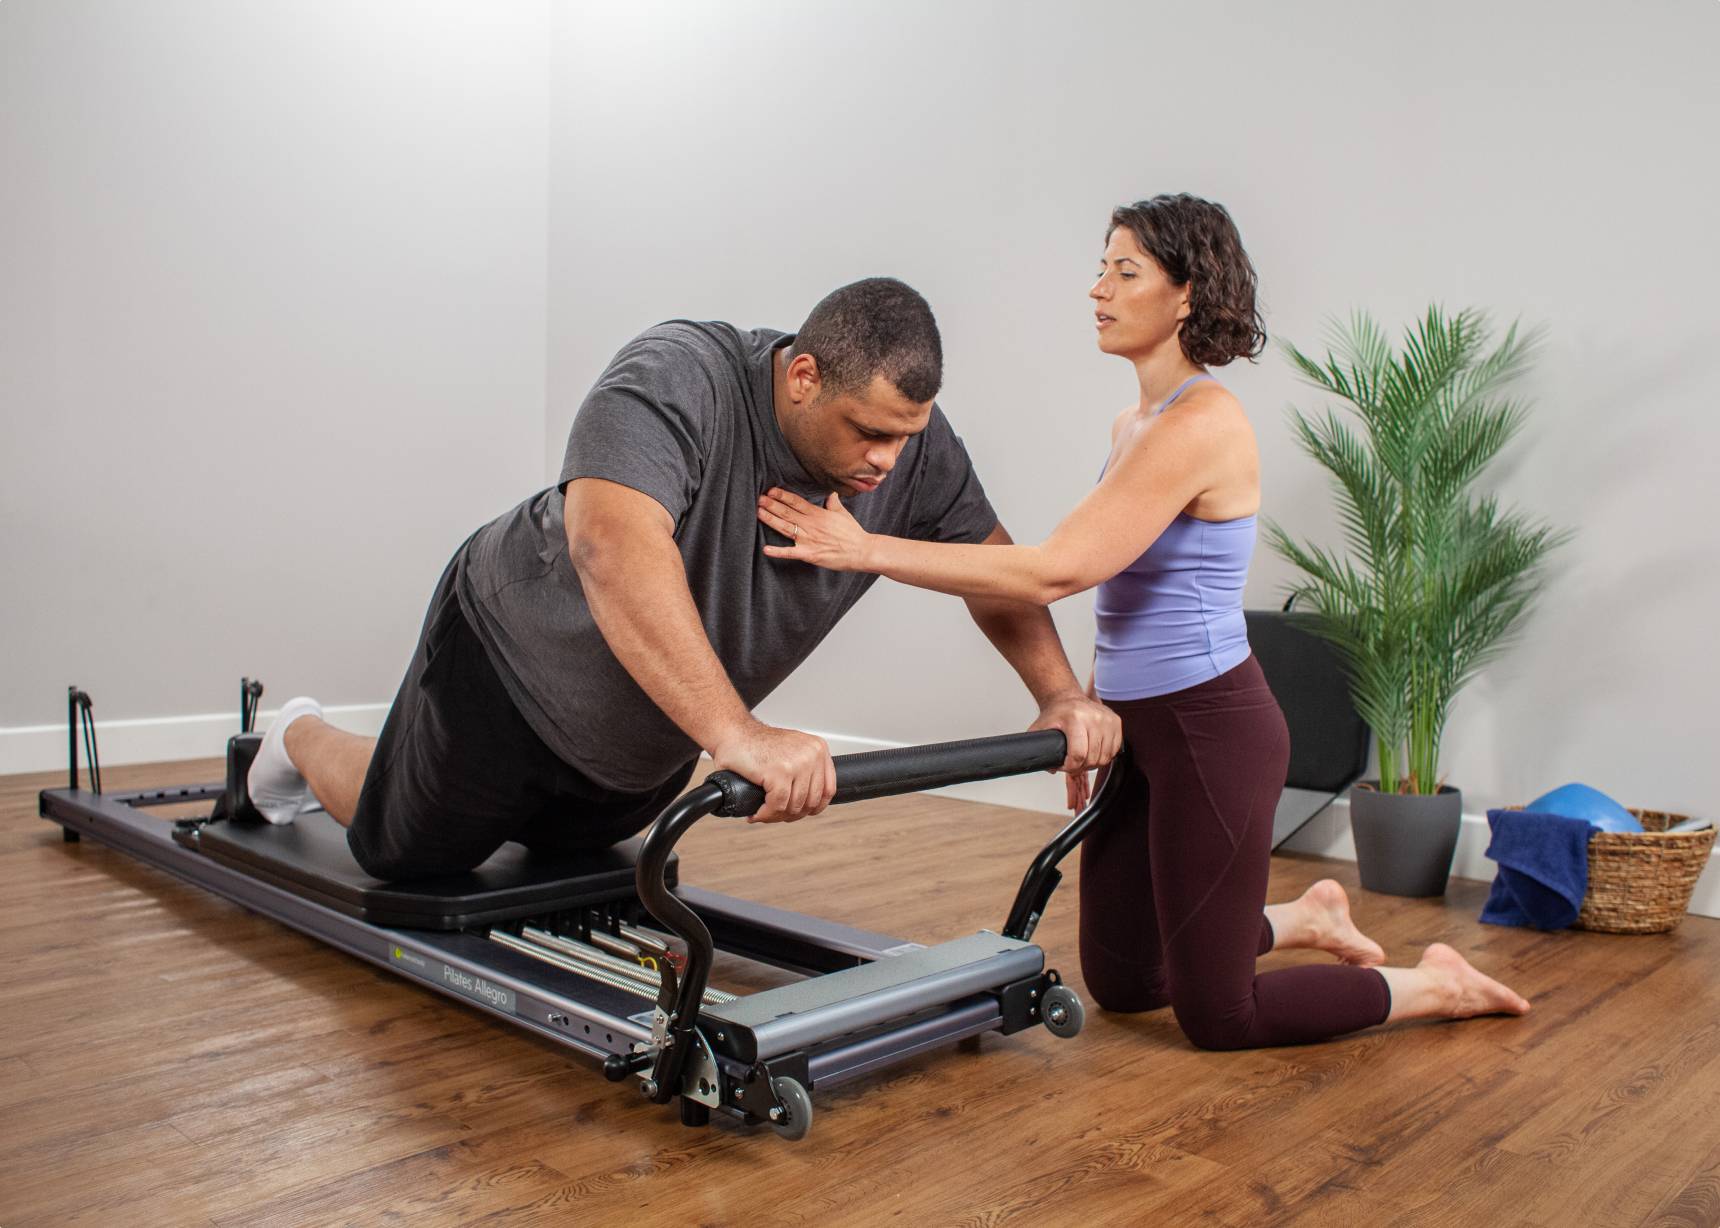  Balanced Body Allegro Stretch Pilates Reformer with Tower and  Mat, Pilates Machine with 14-Inch Stretch, Pilates Exercise Equipment, Workout  Equipment for Home Gym or Studio Use, Black : Sports 